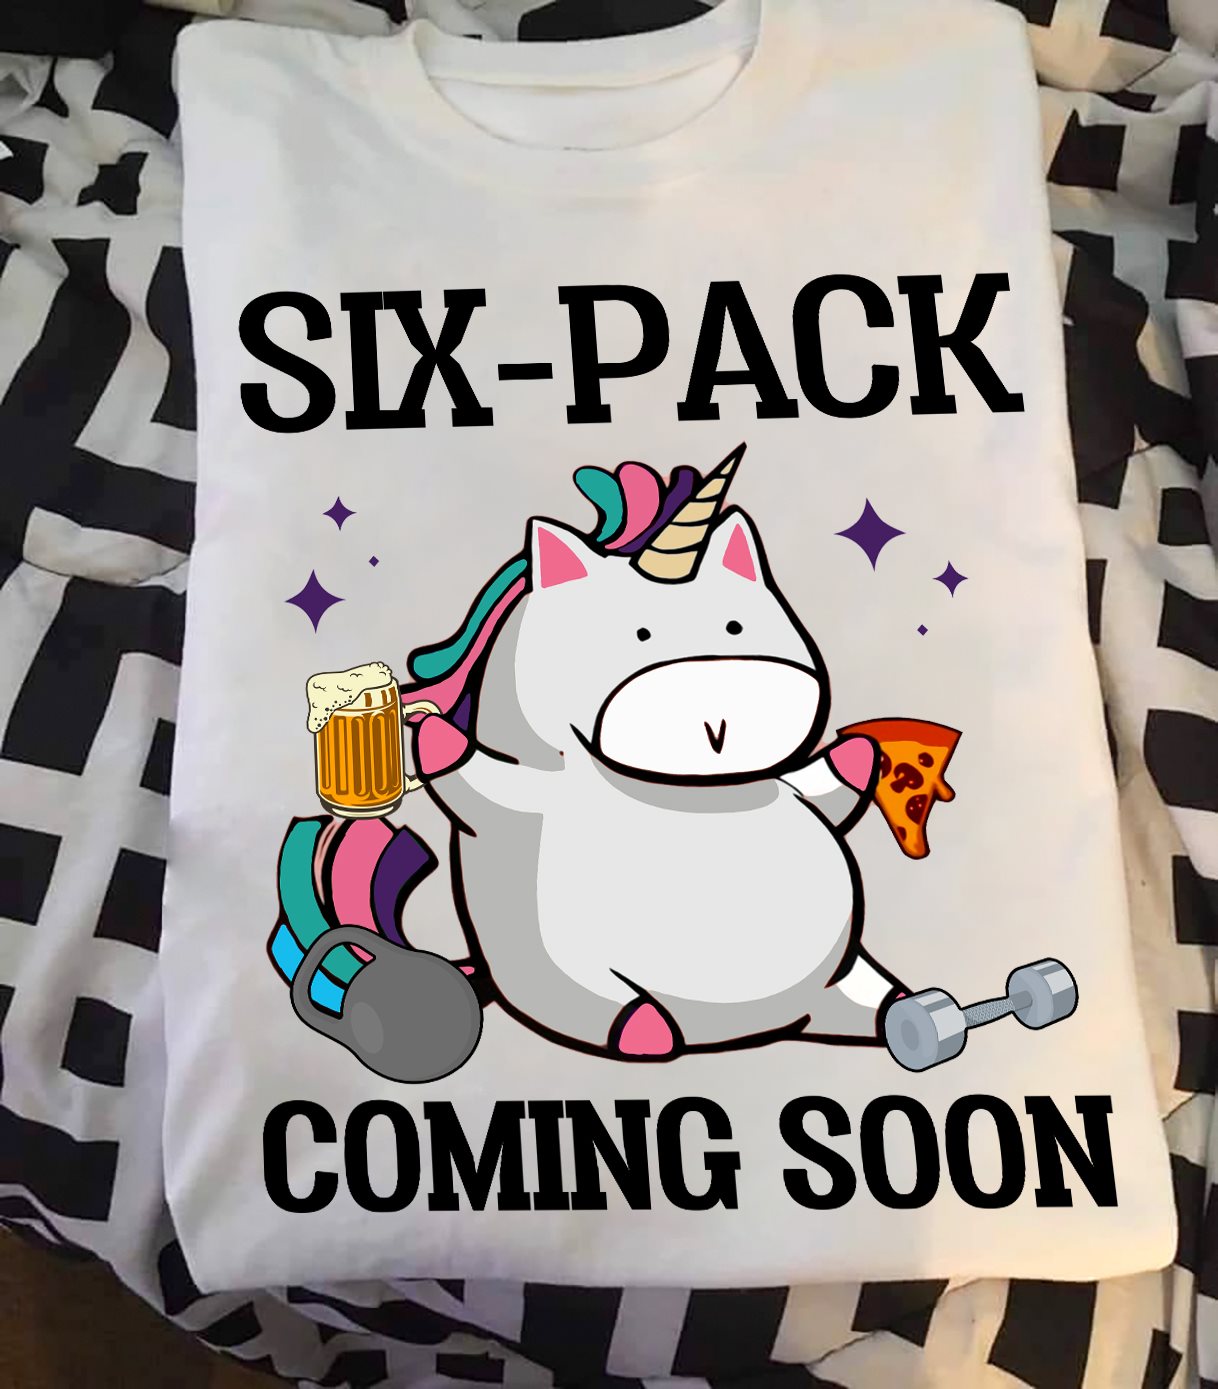 Six-pack coming soon - Fat unicorn with beer and pizza